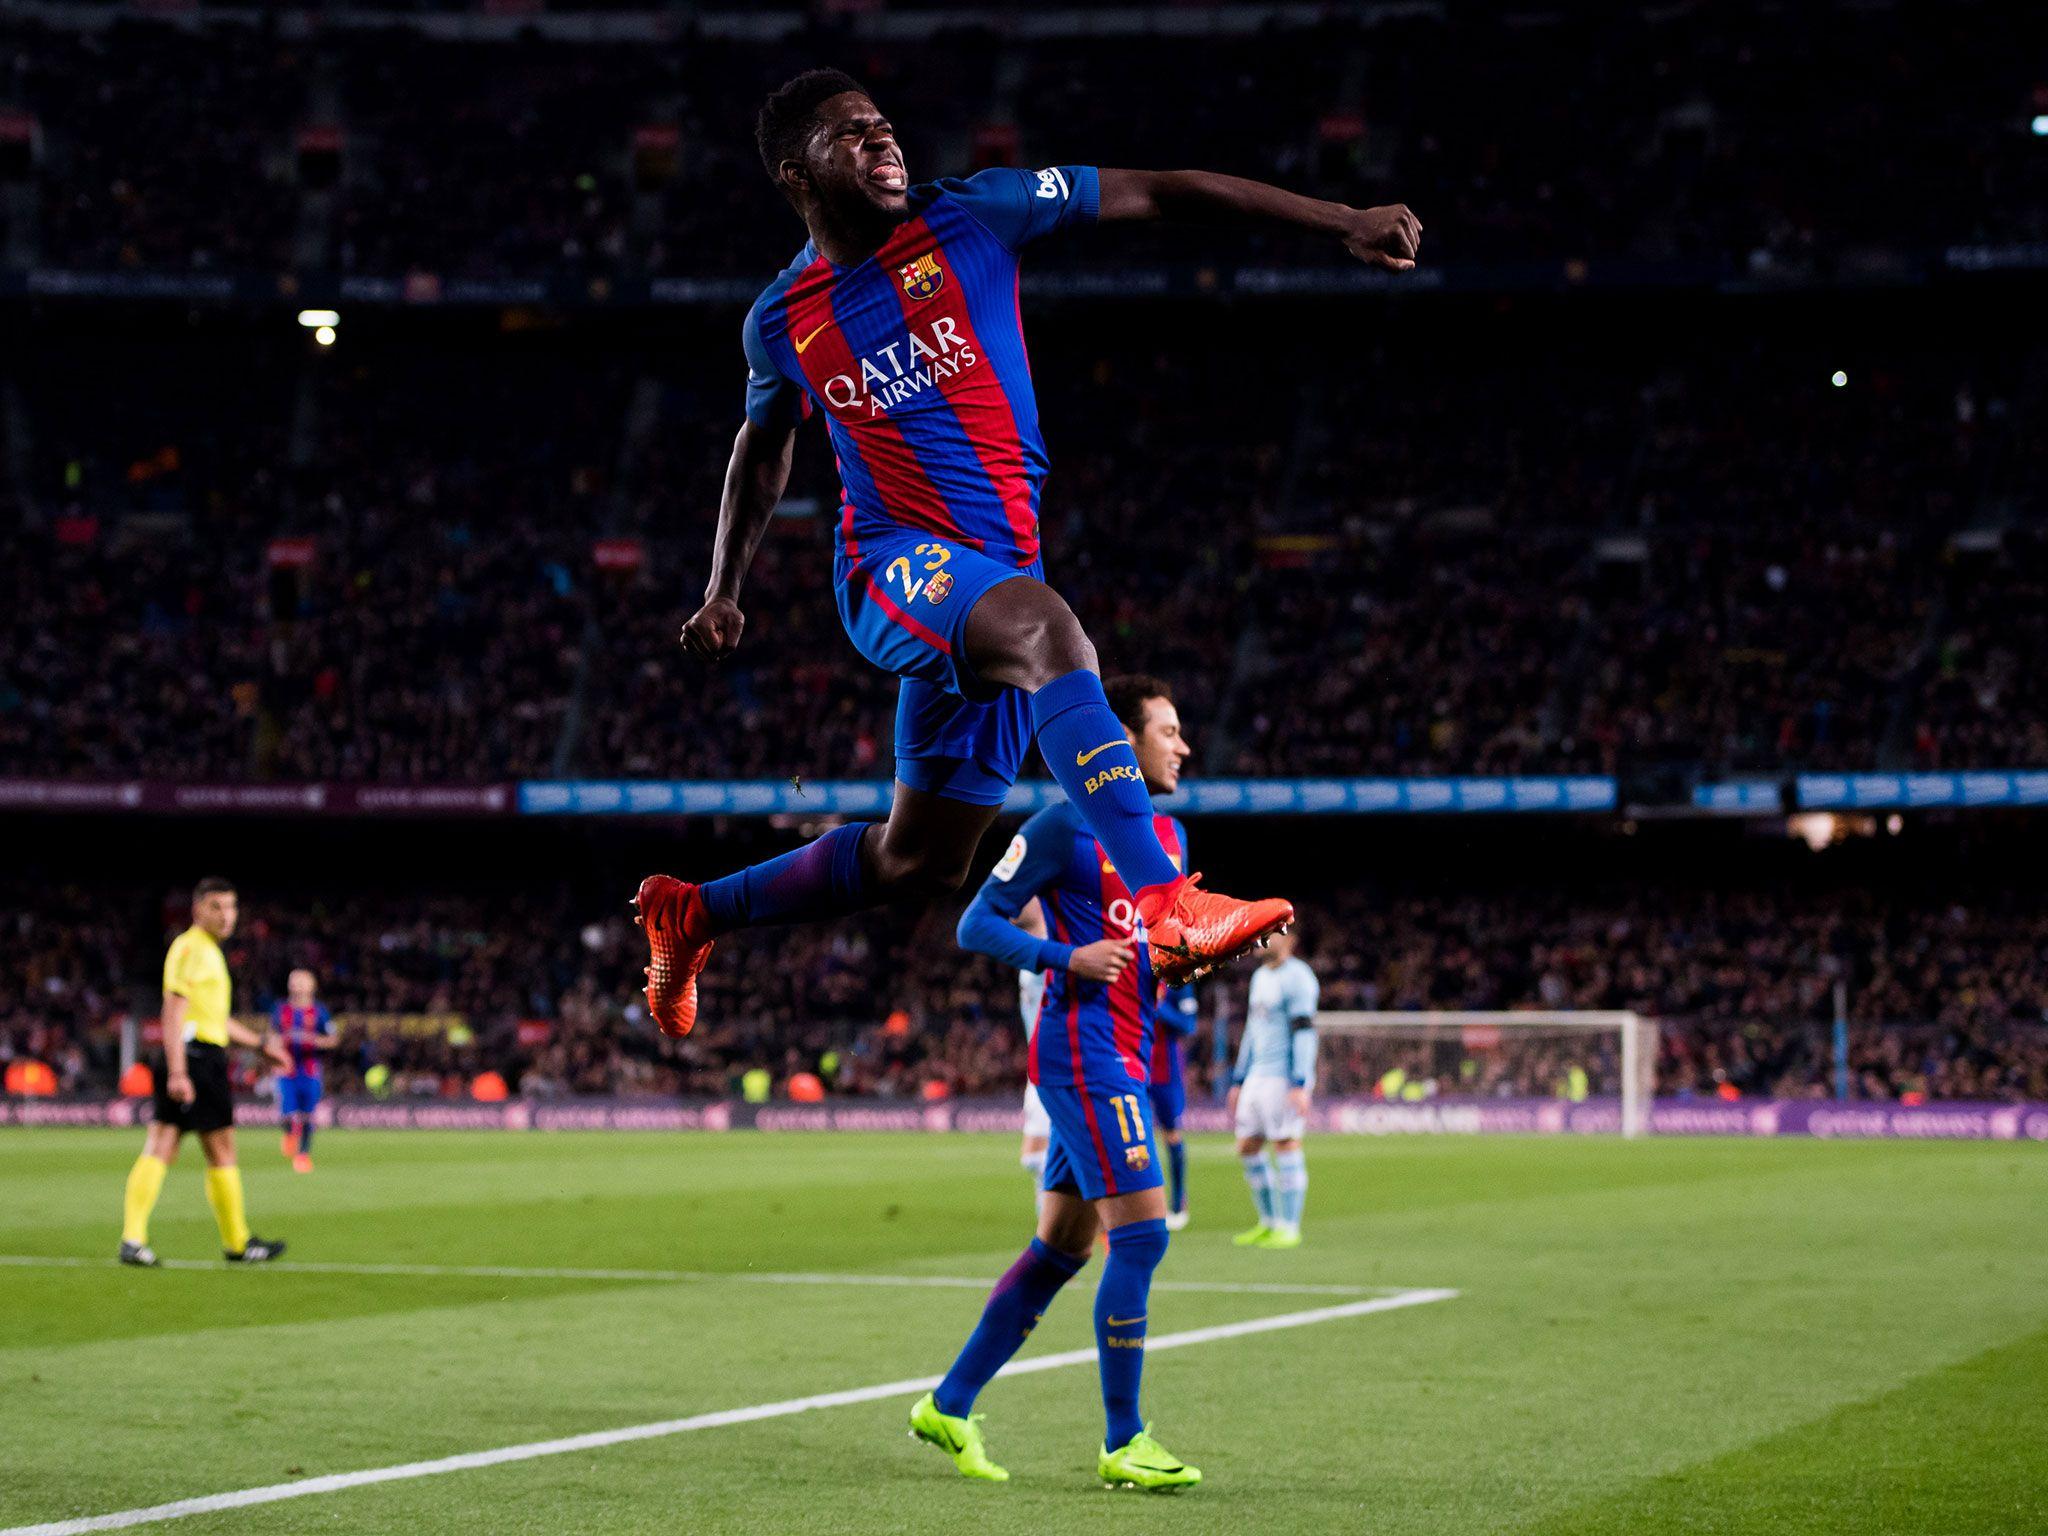 Samuel Umtiti HD Picture. Wallpaper, Image and HD Background